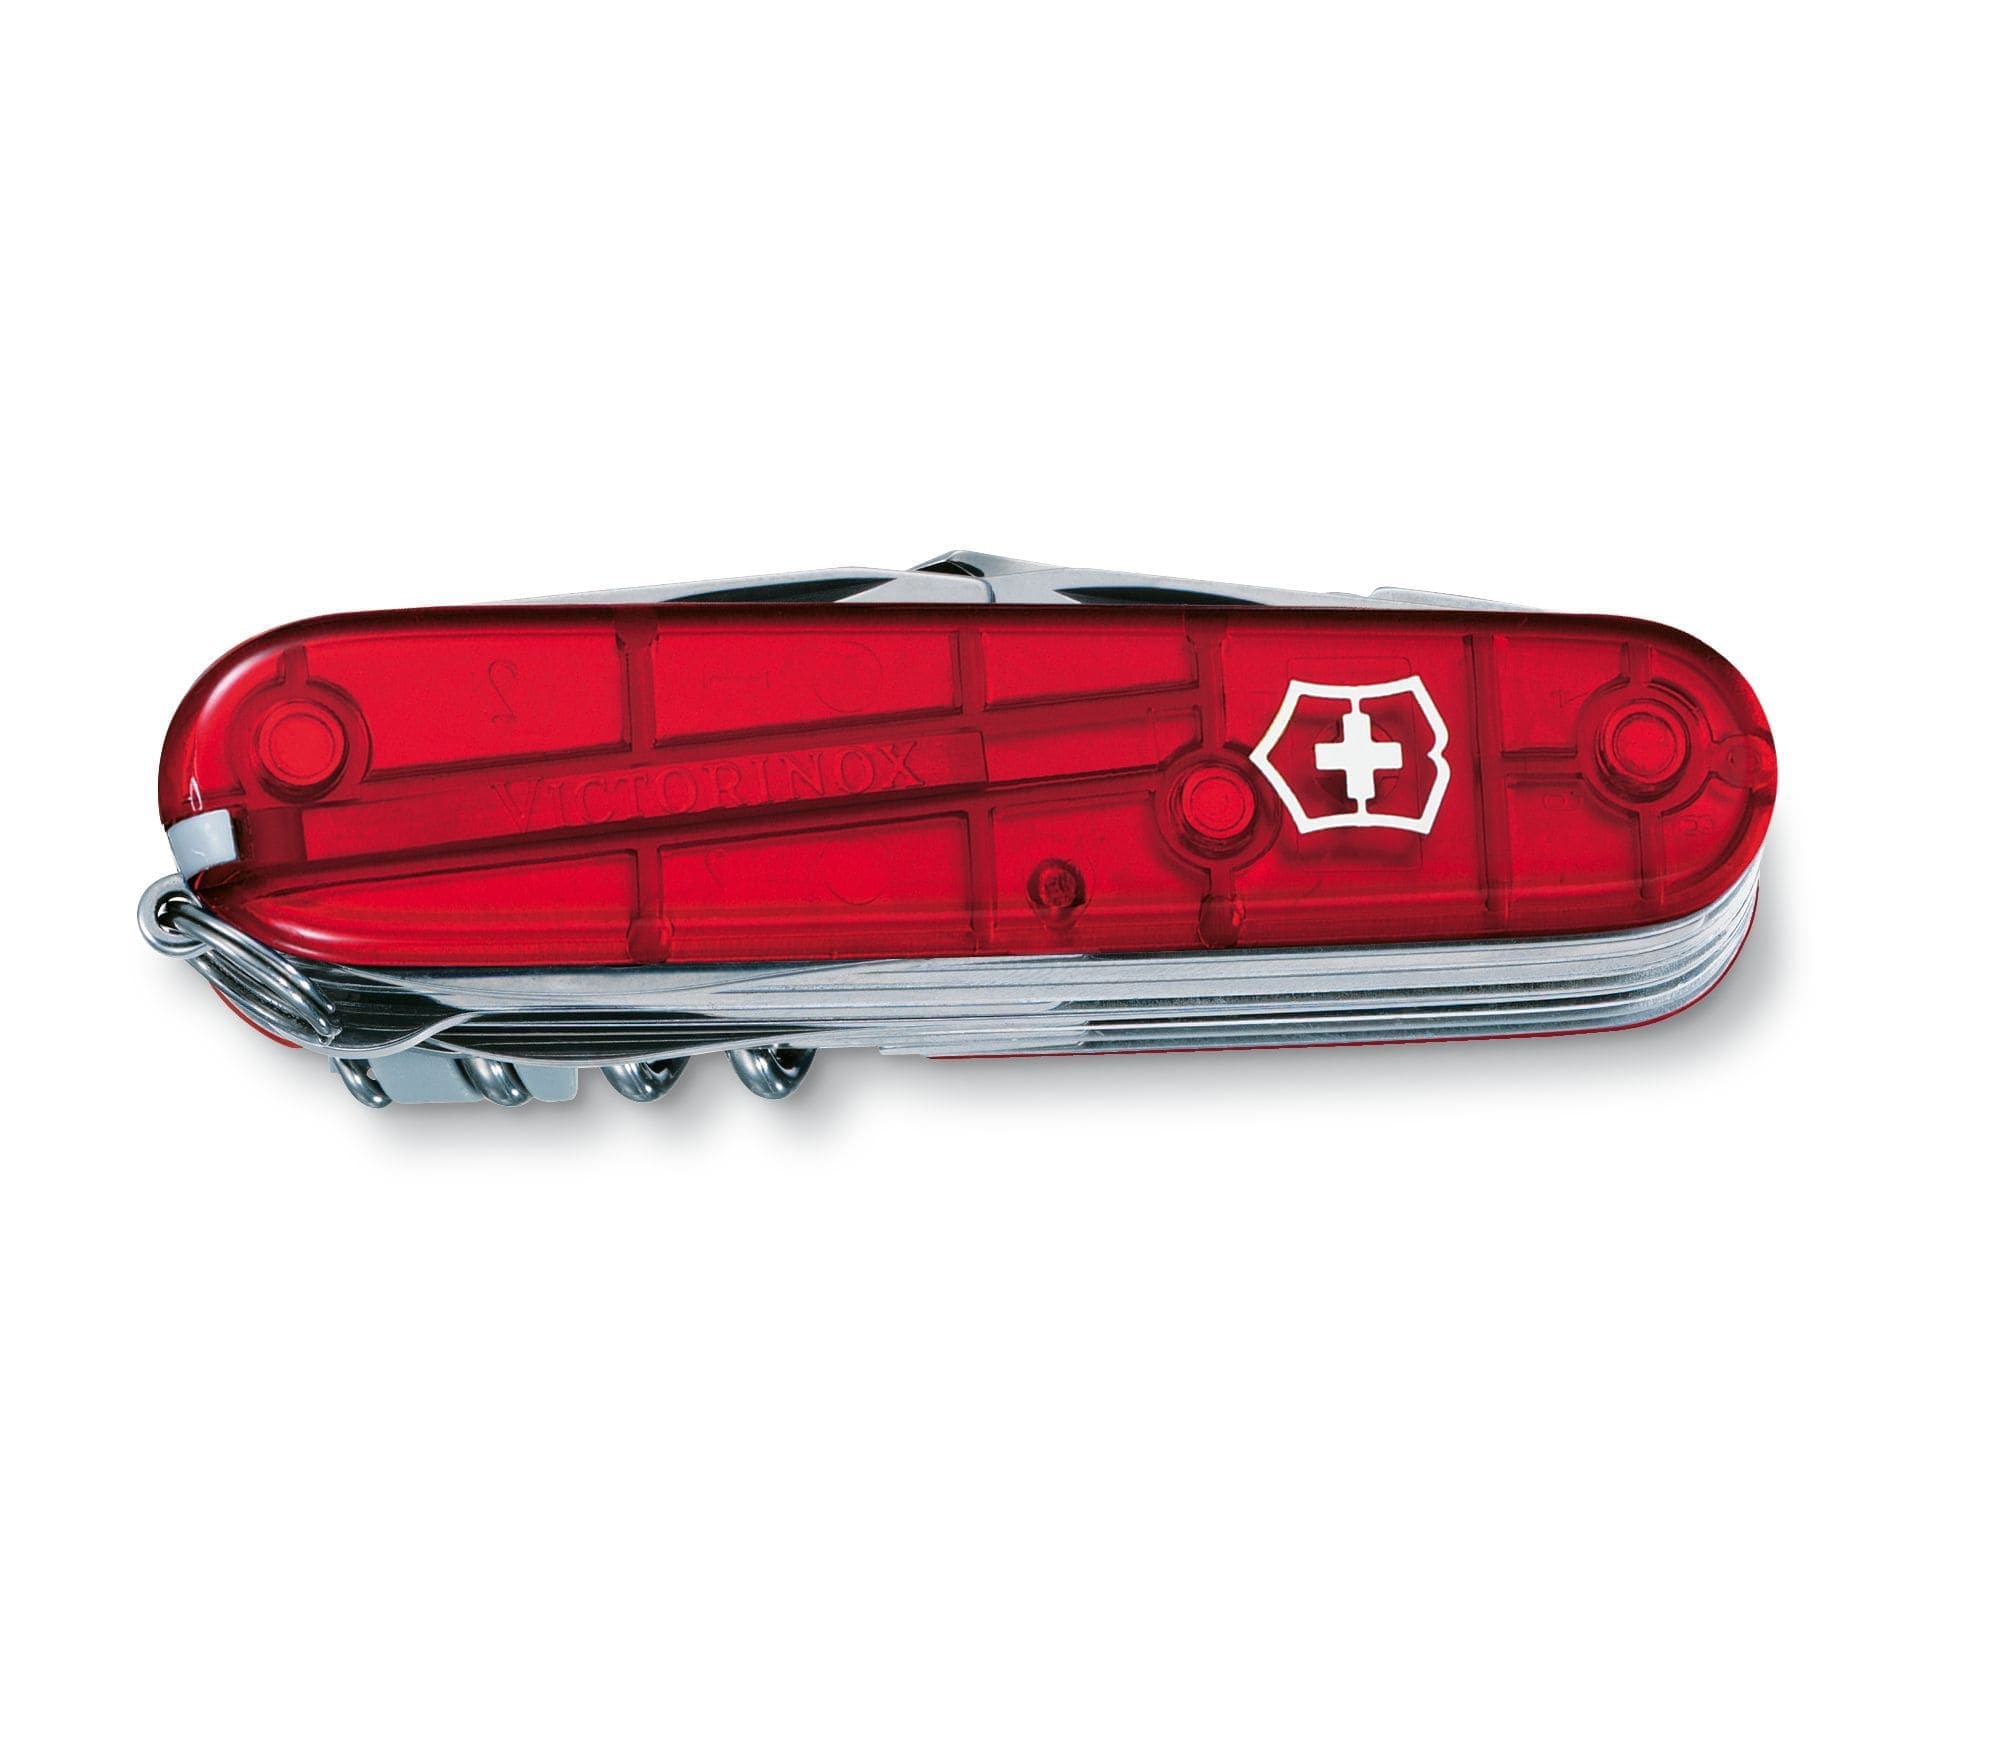 Victorinox Swiss Army Swiss Champ Medium Pocket Knife 91mm Red Translucent With 33 Functions - 1.6795.T